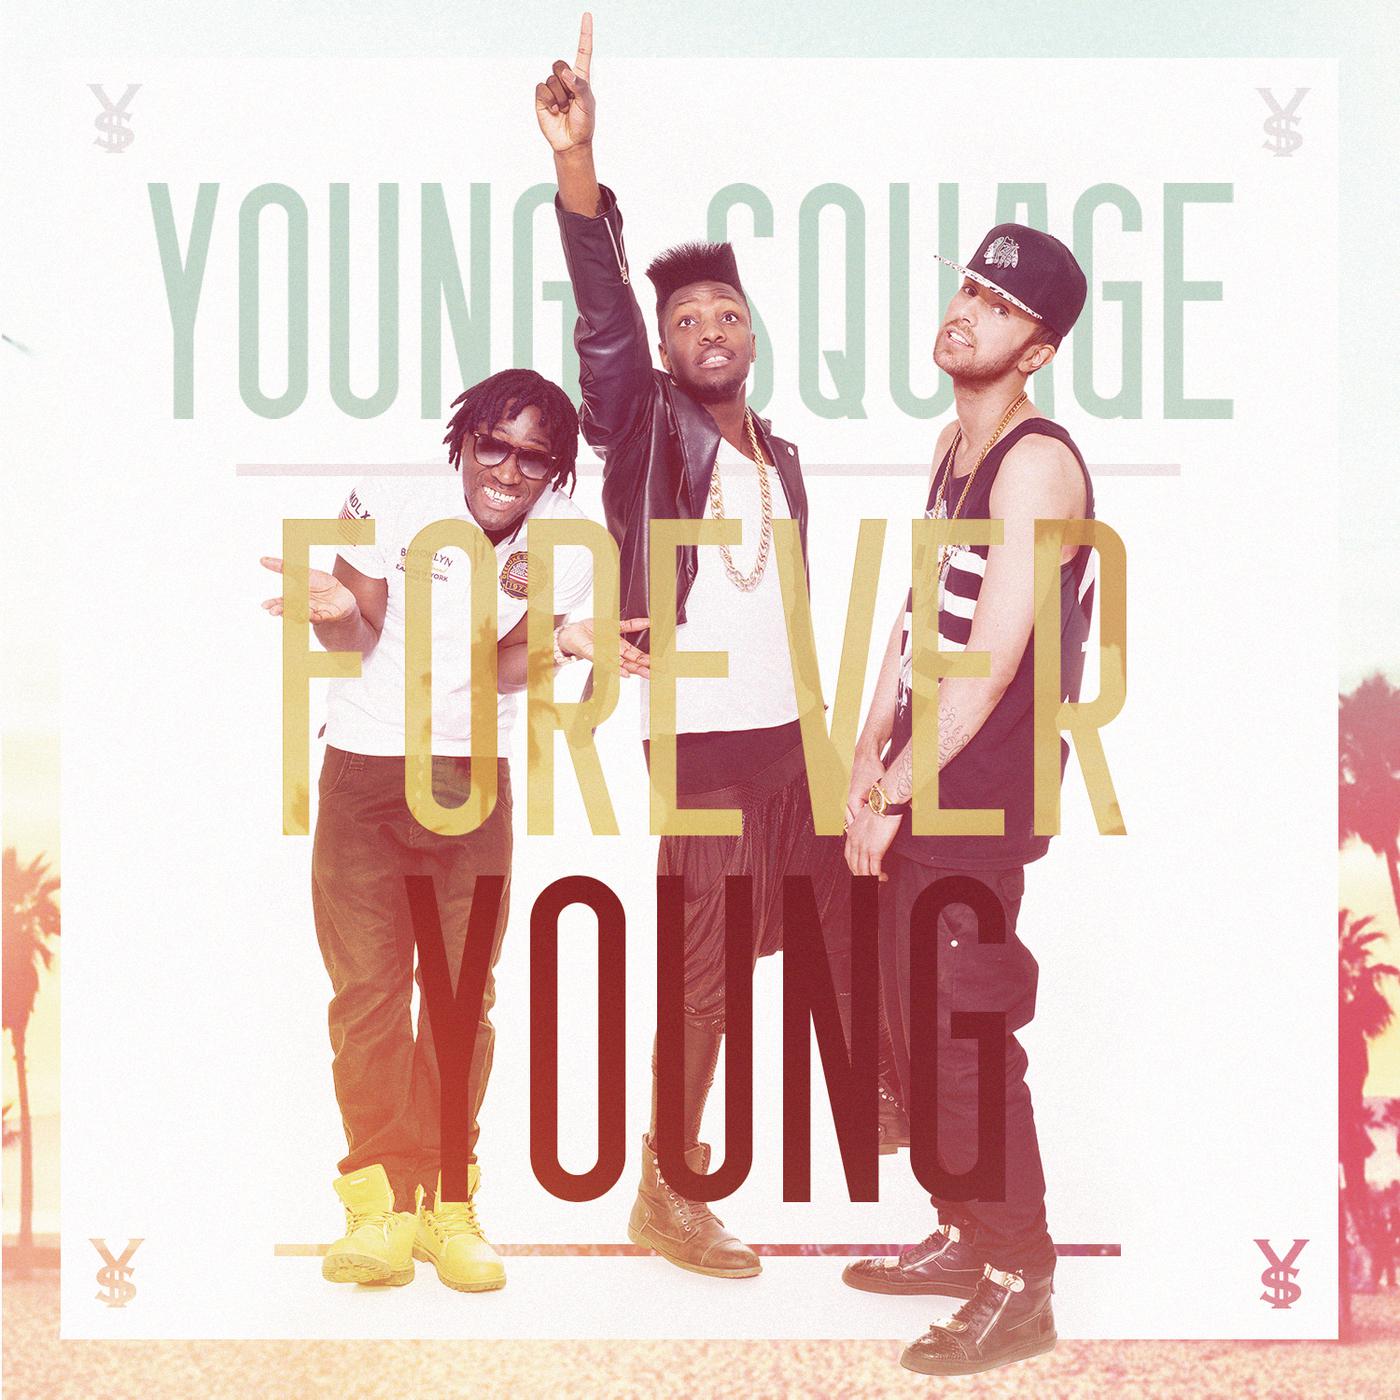 Be album songs. Forever young песня. Young Forever альбом. Обложка песни Forever young. Forever young саундтрек к фильму.